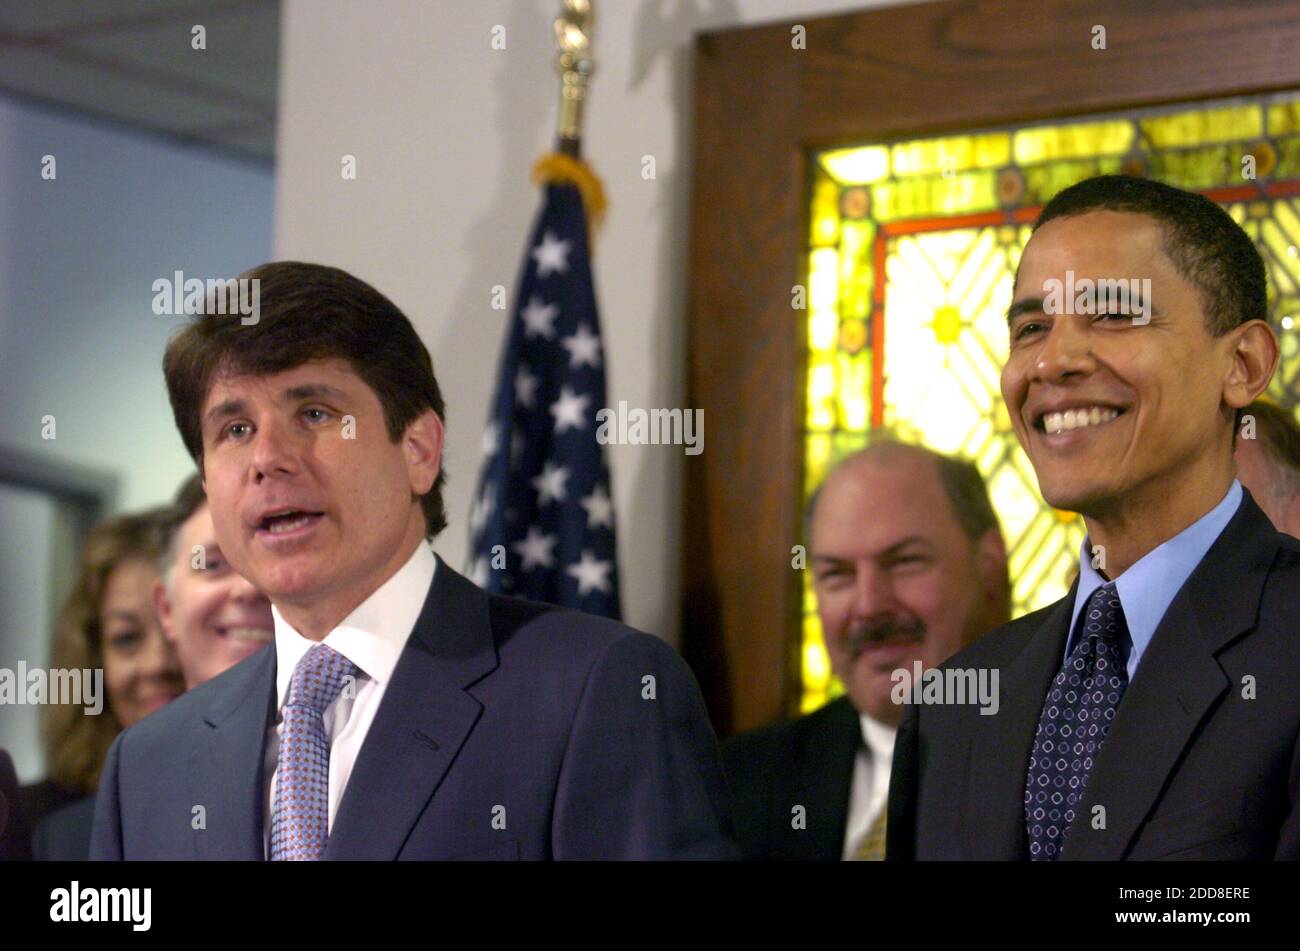 NO FILM, NO VIDEO, NO TV, NO DOCUMENTARY - Governor Rod Blagojevich and his chief of staff, John Harris, were arrested by FBI agents on federal corruption charges Tuesday morning, December 9, 2008. Prosecutors allege that Blagojevich, shown here with then state Senator Barack Obama, April 2, 2004, sought appointment for himseld as Secretary of Health and Human Services in the new Obama administration, or a lucrative job with a union, in exchange for appointing a union-preferred candidate. Photo by Milbert O. Brown/Chicago Tribune/MCT/ABACAPRESS.COM Stock Photo